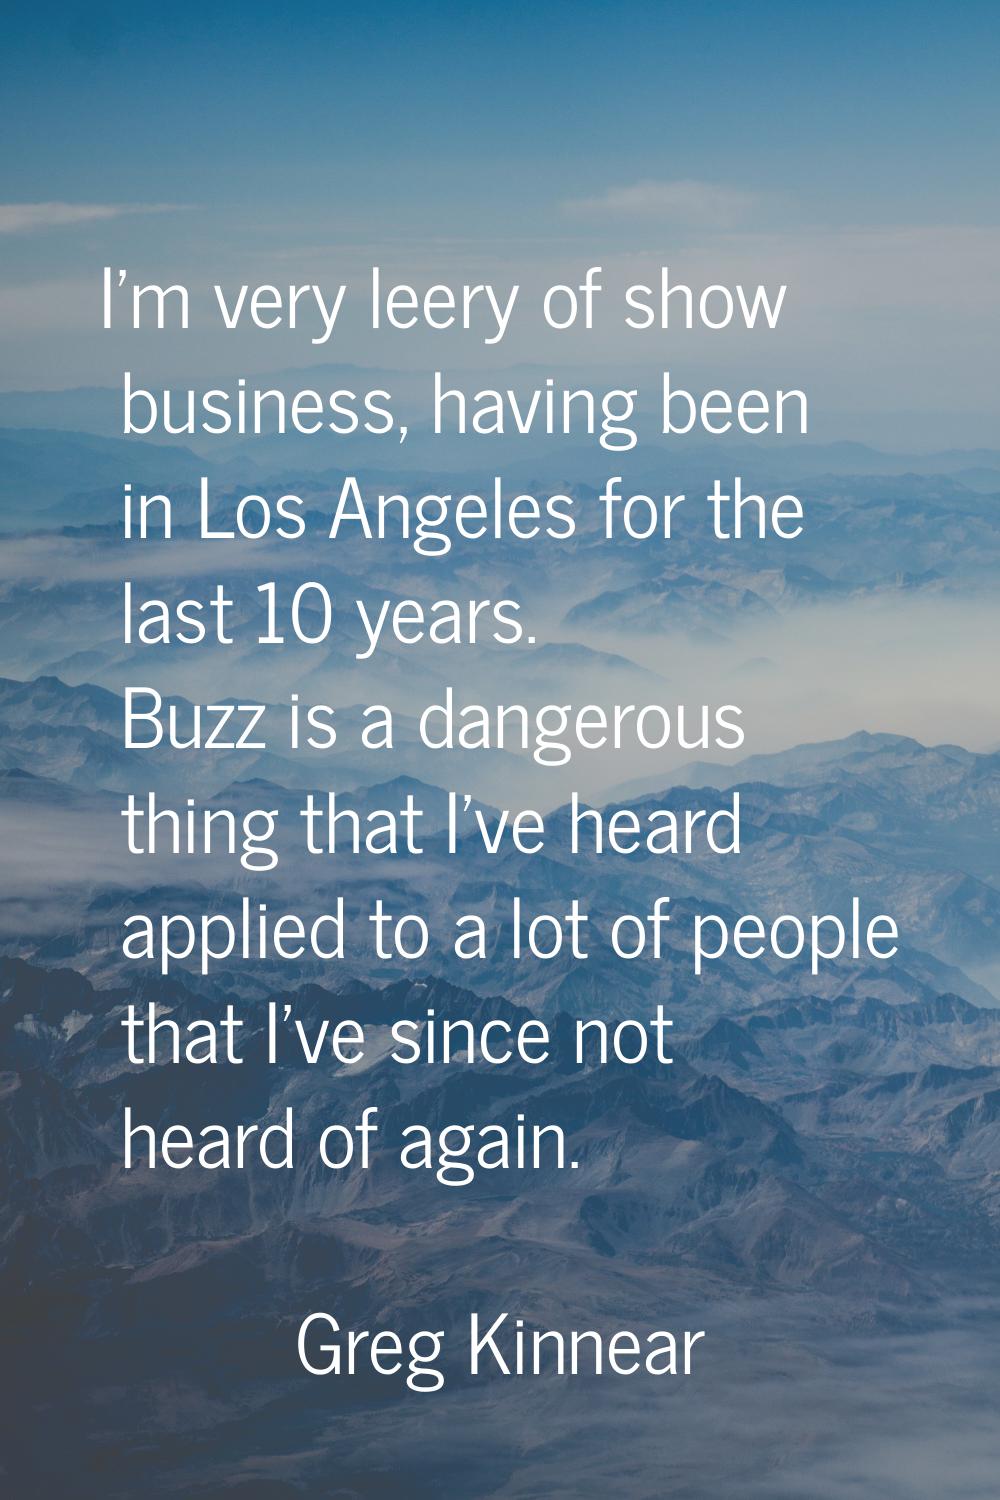 I'm very leery of show business, having been in Los Angeles for the last 10 years. Buzz is a danger